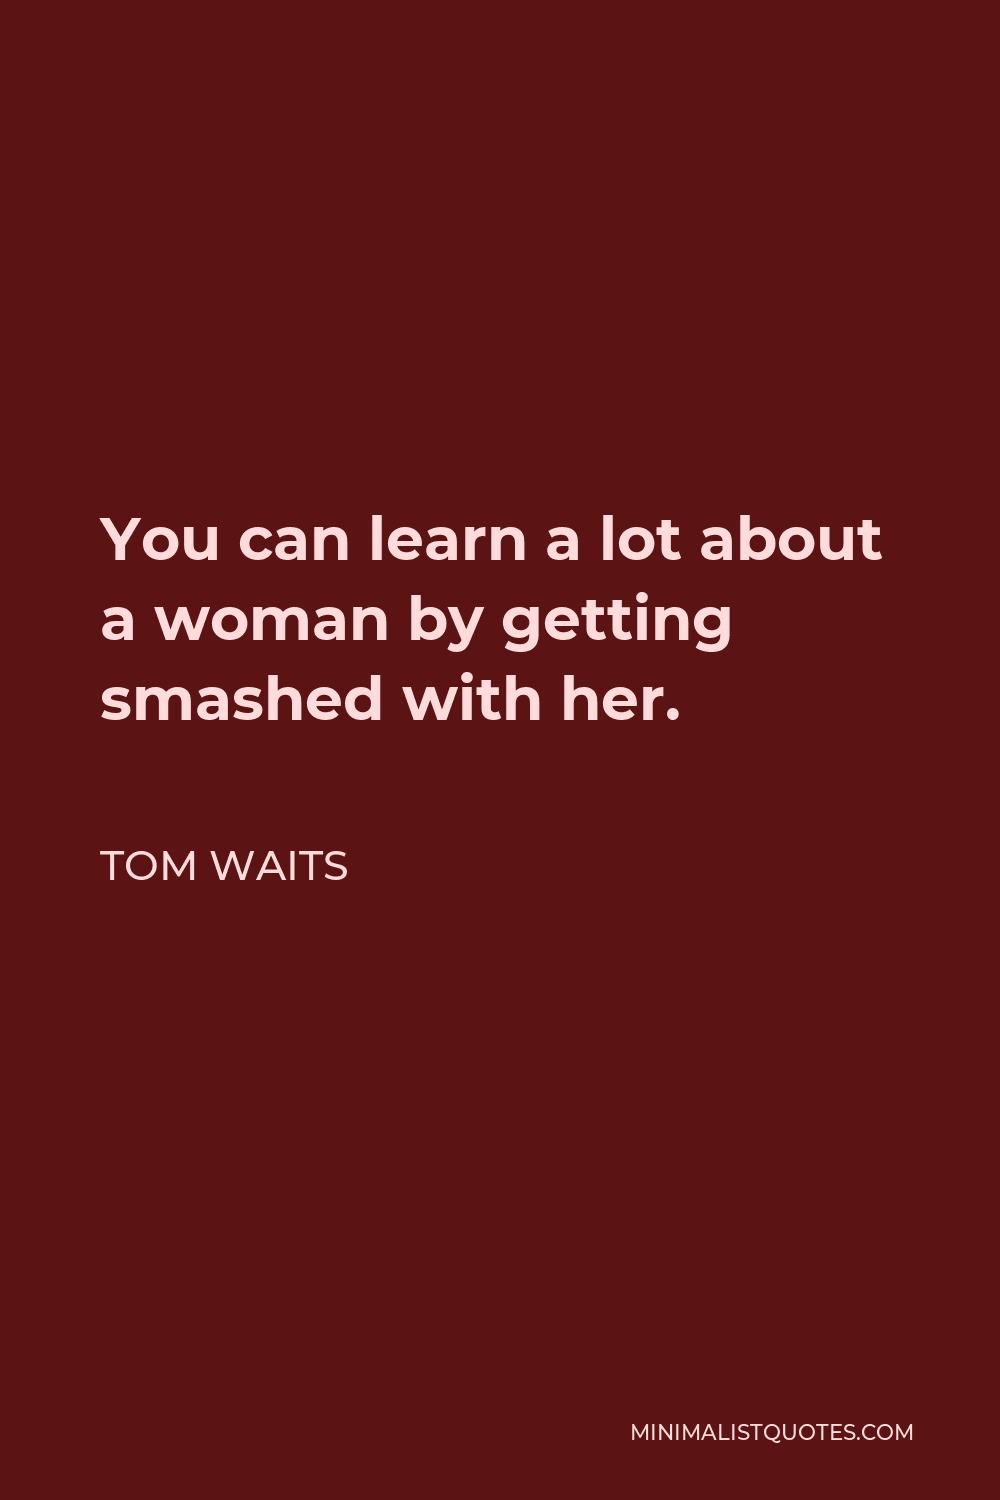 Tom Waits Quote - You can learn a lot about a woman by getting smashed with her.